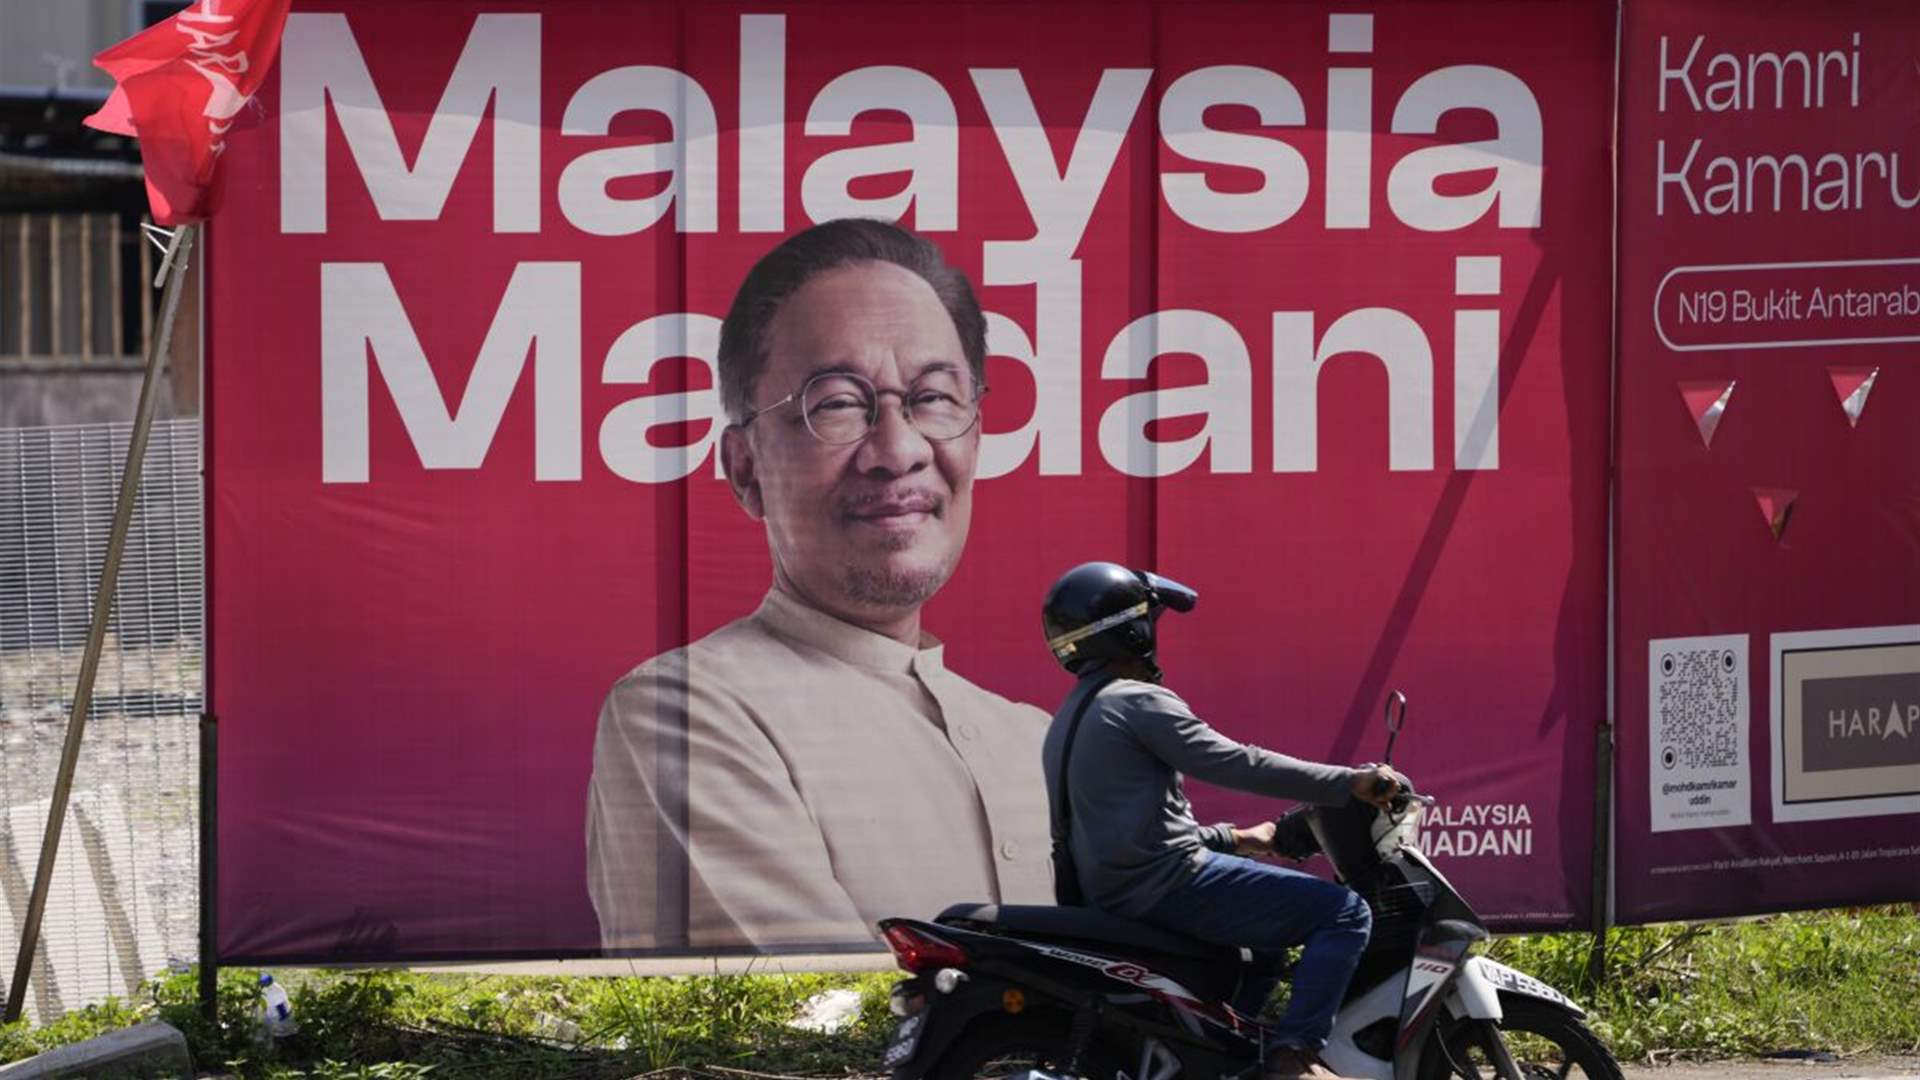 Malaysians Head to the Polls in State Council Elections, Testing Support for Anwar Ibrahim&#39;s Unity Government